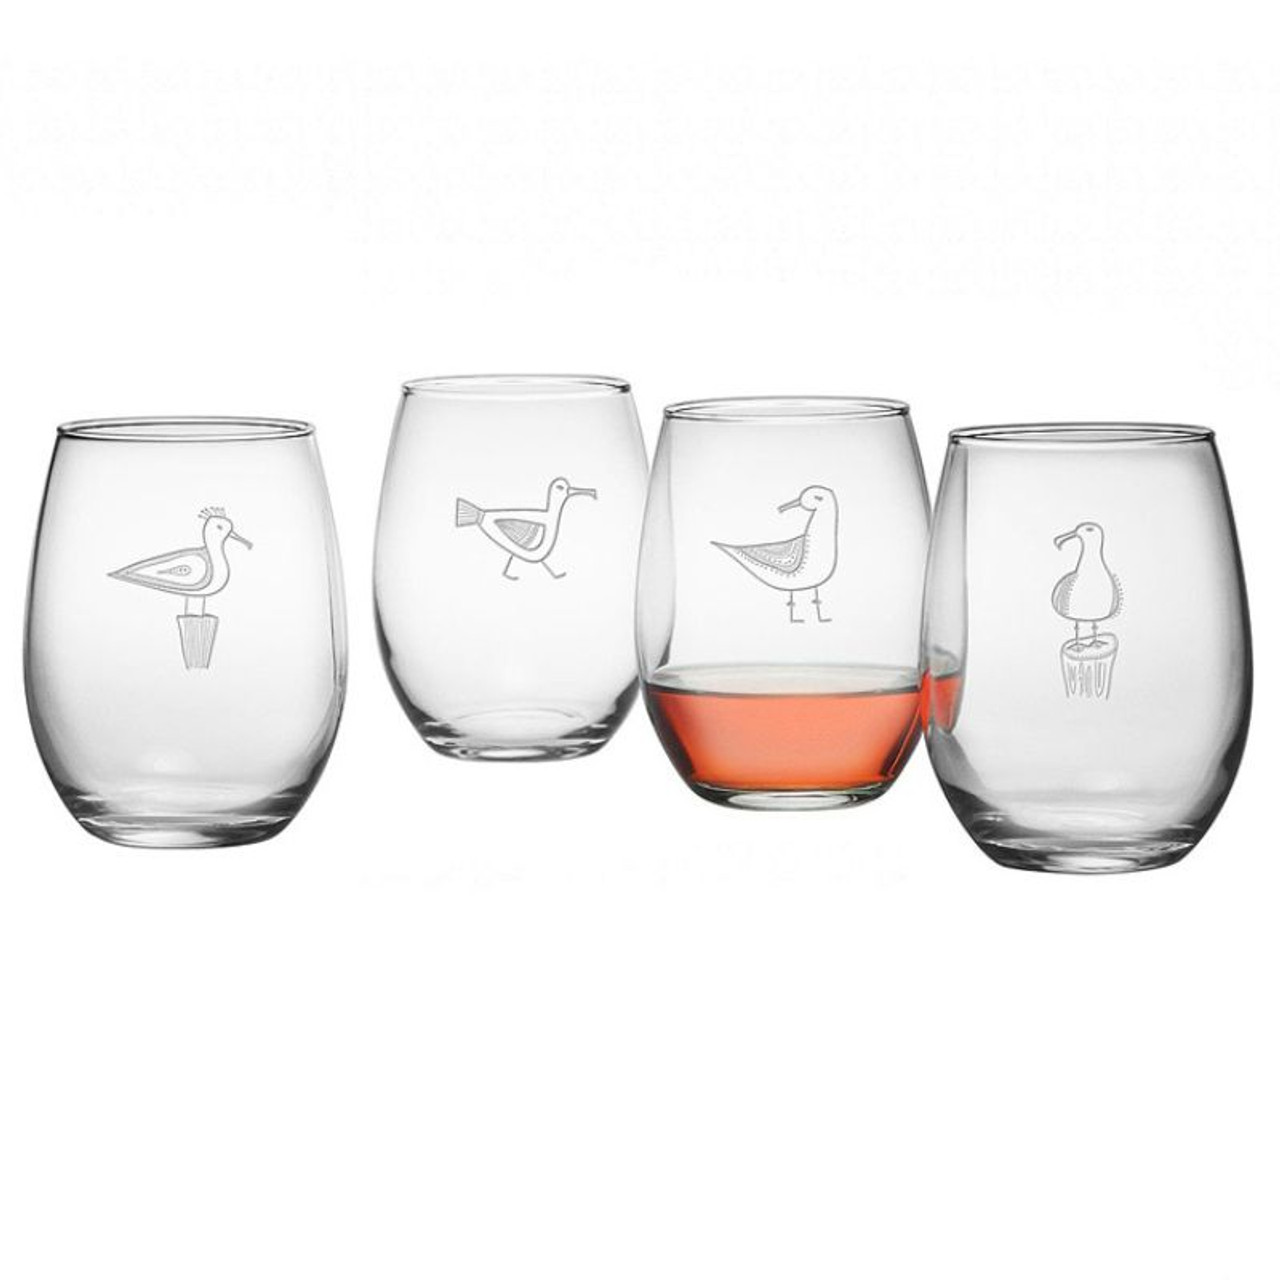 https://cdn11.bigcommerce.com/s-262q5dgaa3/images/stencil/1280x1280/products/11568/22922/seagull-stemless-wine-glass-set-of-4-4__32532.1662717537.jpg?c=1